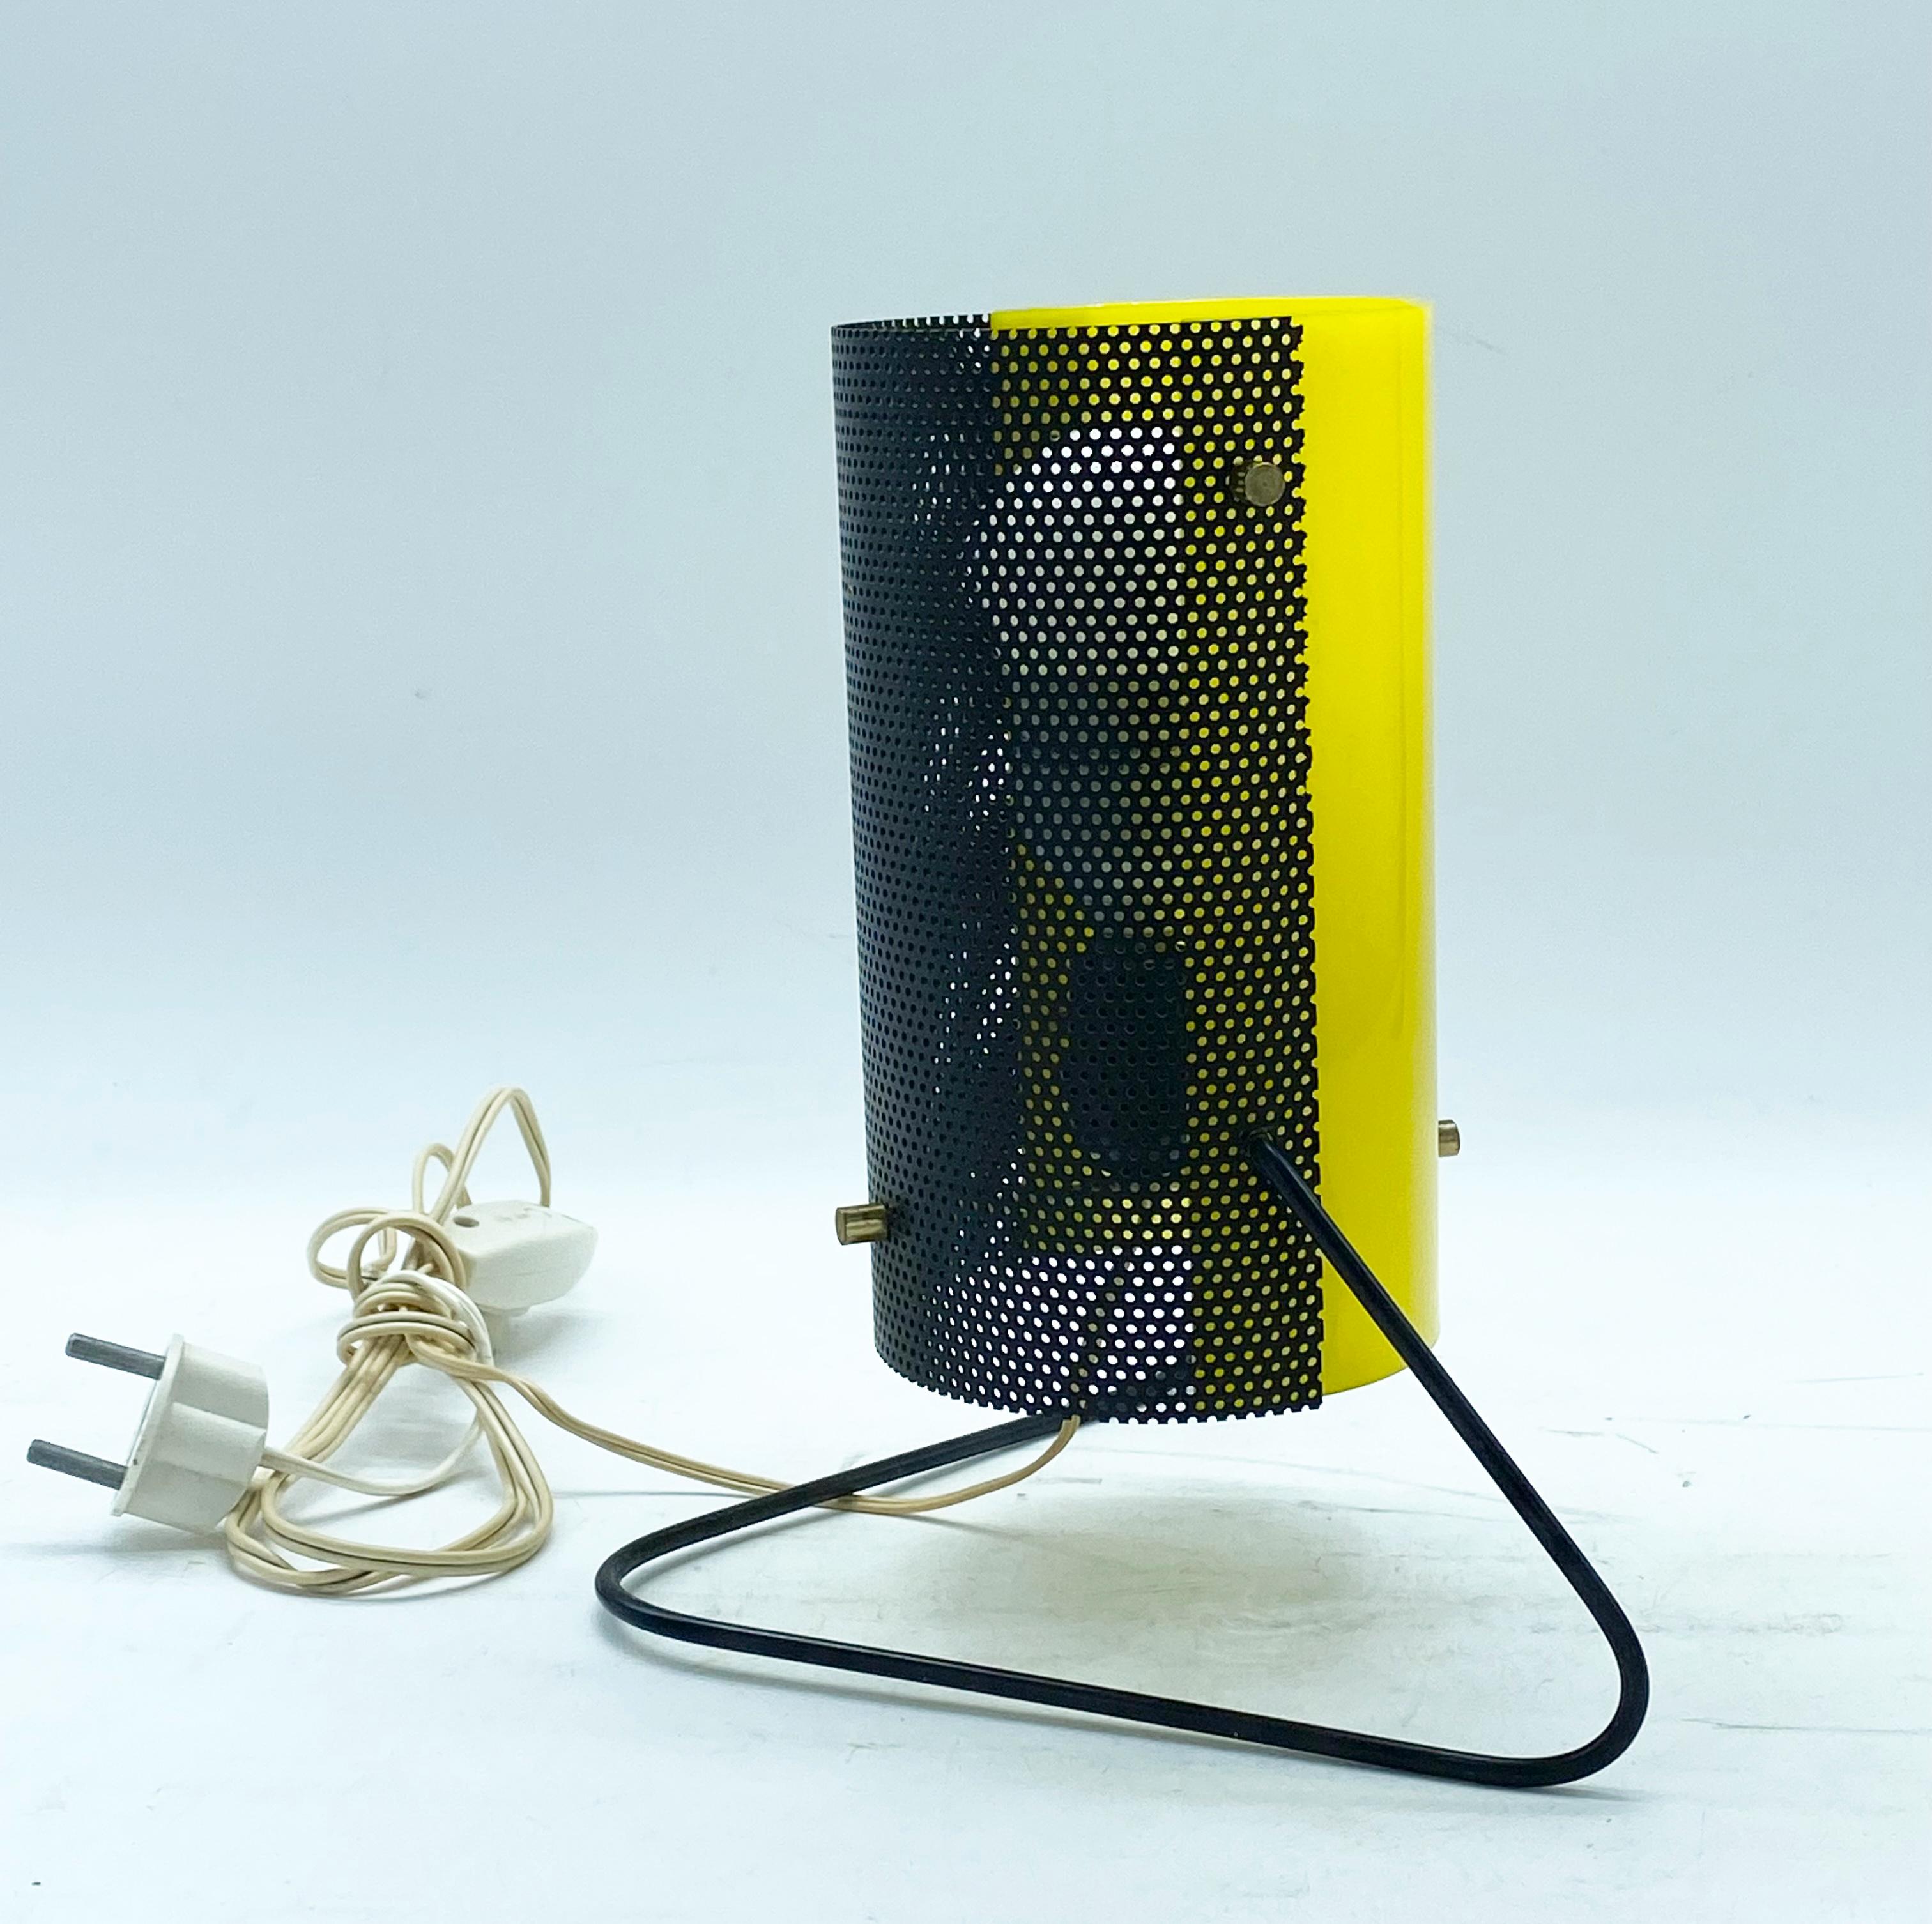 Rare Stilux Milano 1960s perforated metal table lamp. This tiny, quirky design echoes those of Mathieu Matégot, but with a typically Italian 1960s twist. Executed in perforated black painted metal, clean yellow perspex, brass hardware on a